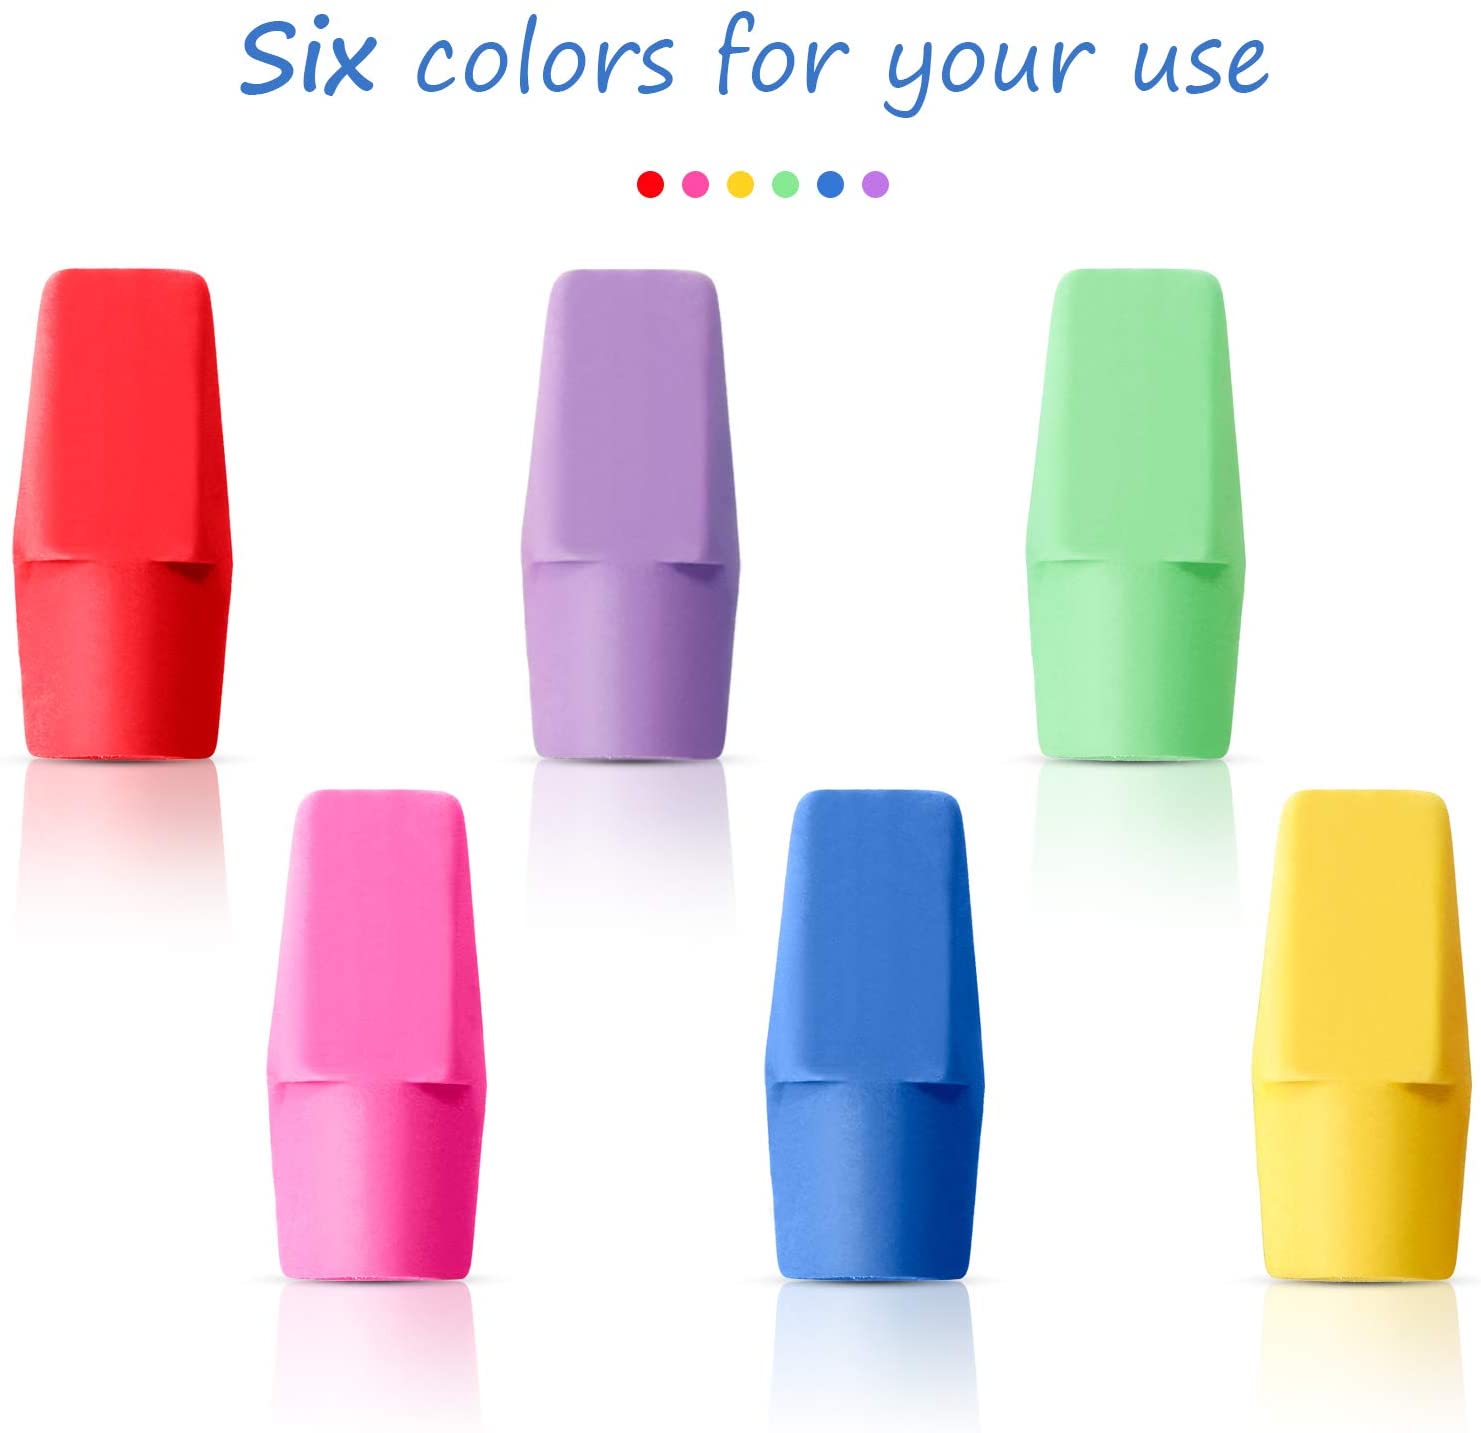 50 Pieces Pencil Top Erasers Cap Erasers and A Pencil Sharpener White